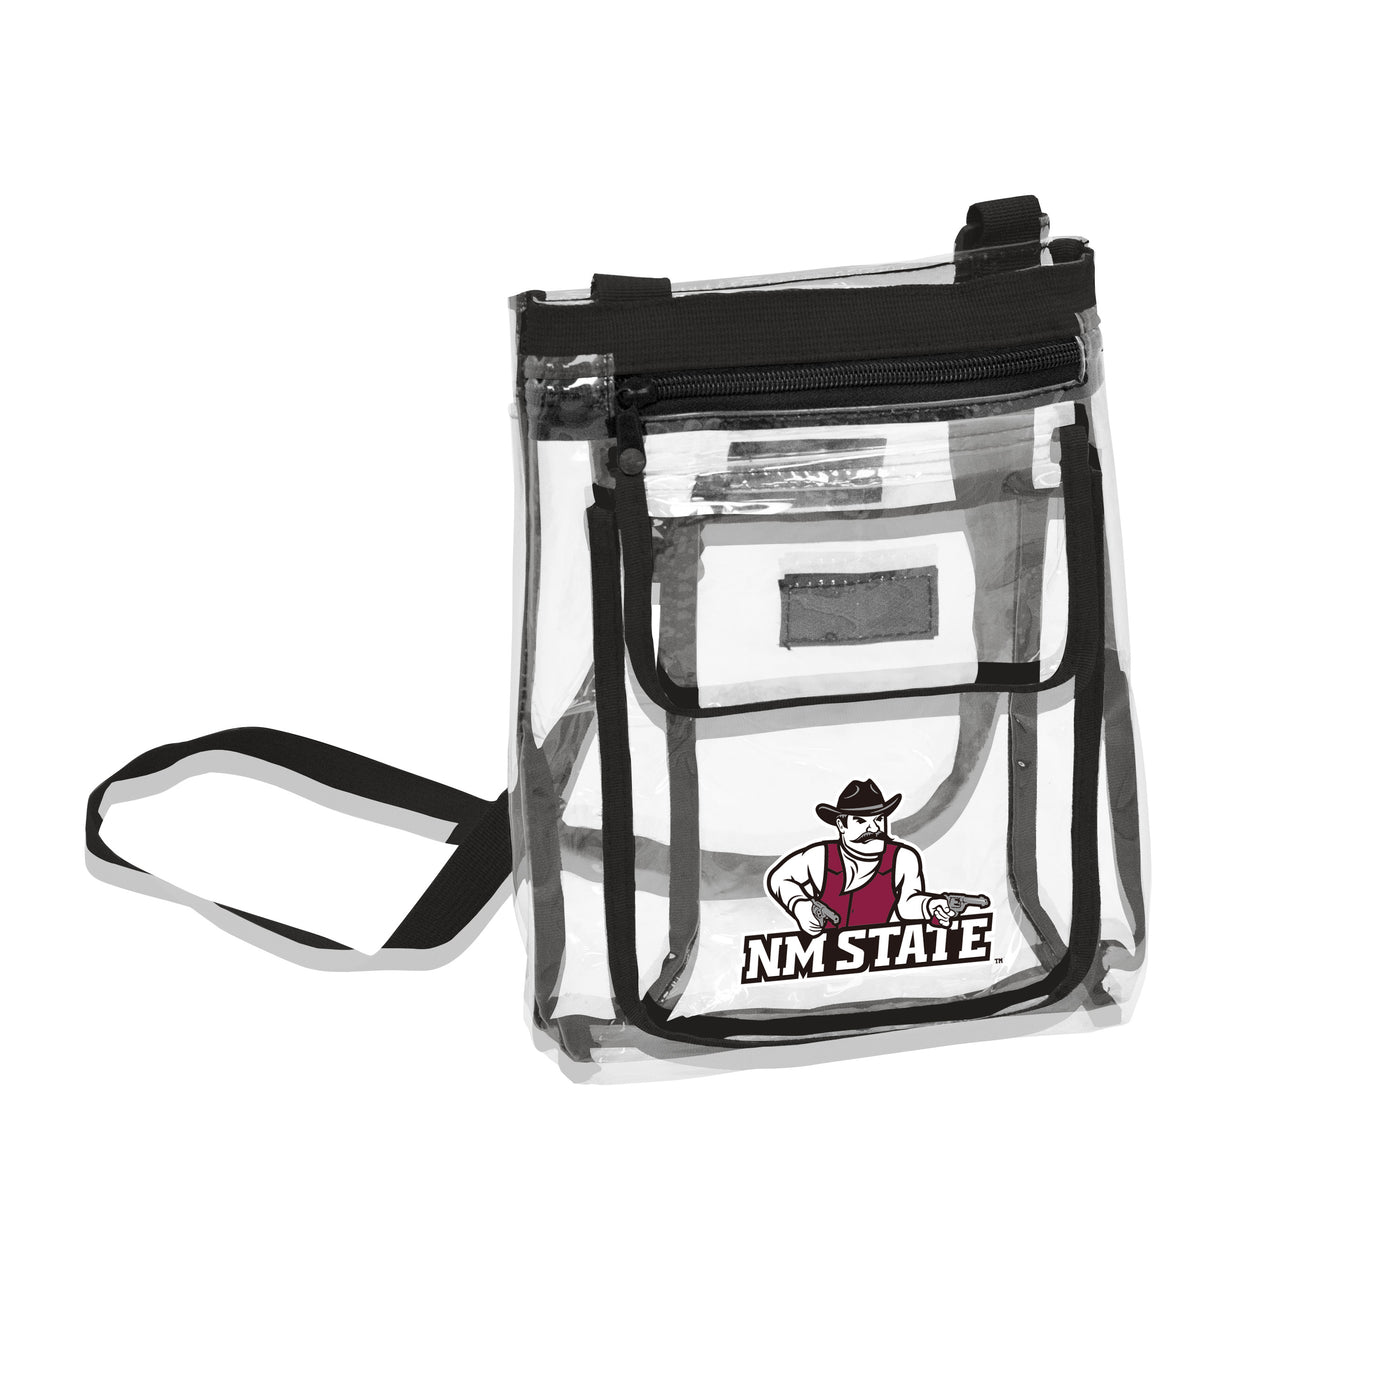 NM State Gameday Clear Crossbody